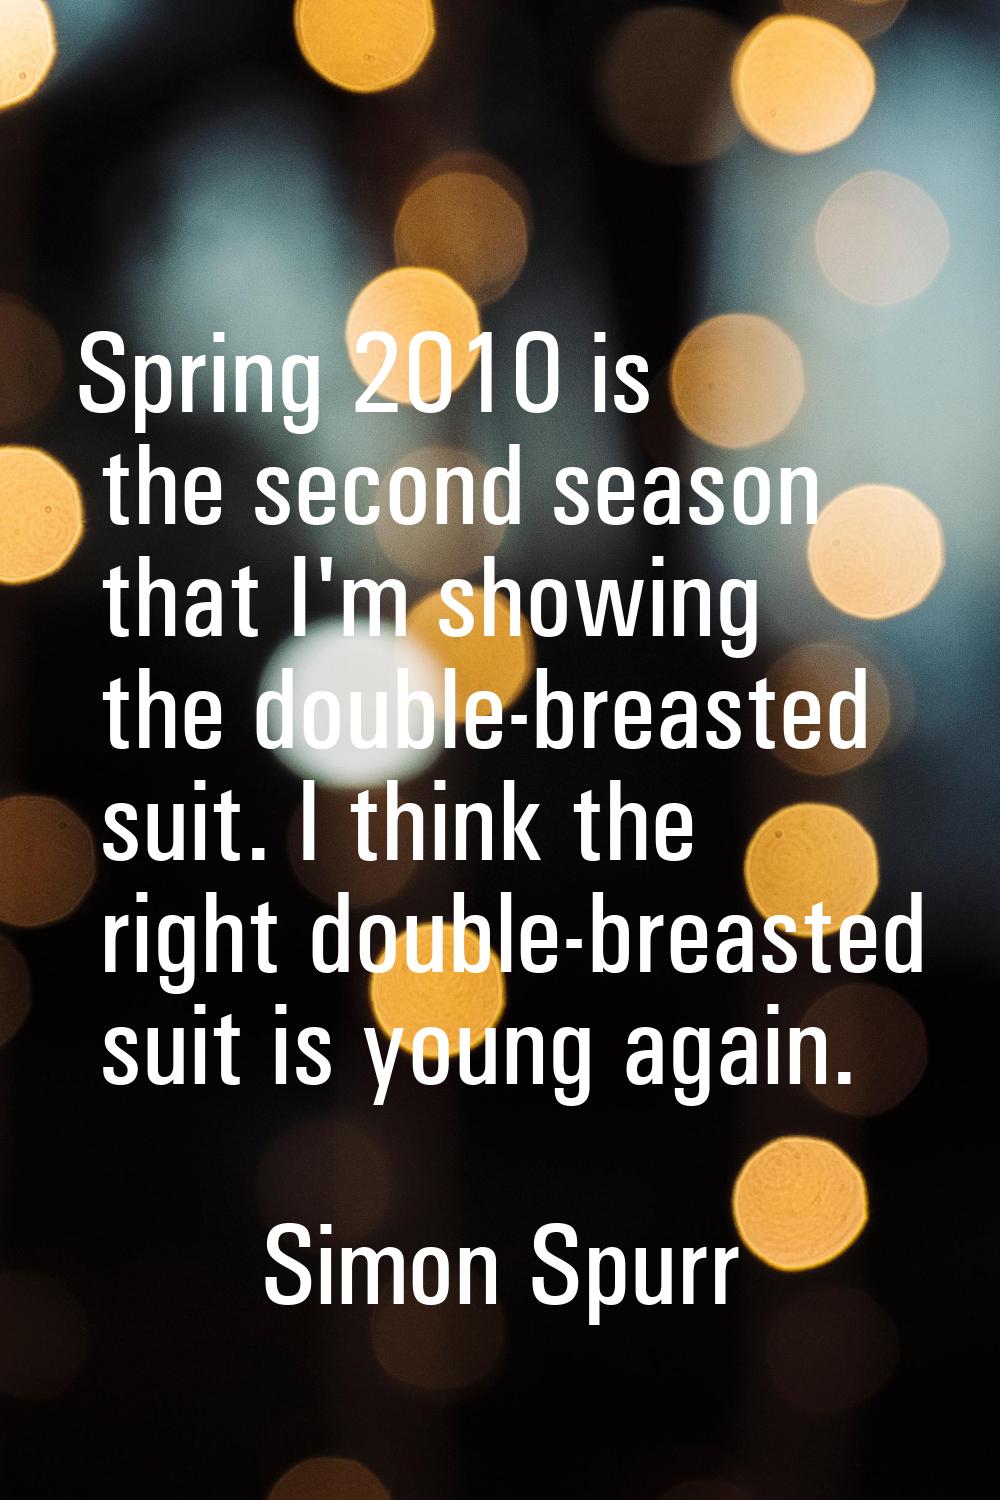 Spring 2010 is the second season that I'm showing the double-breasted suit. I think the right doubl